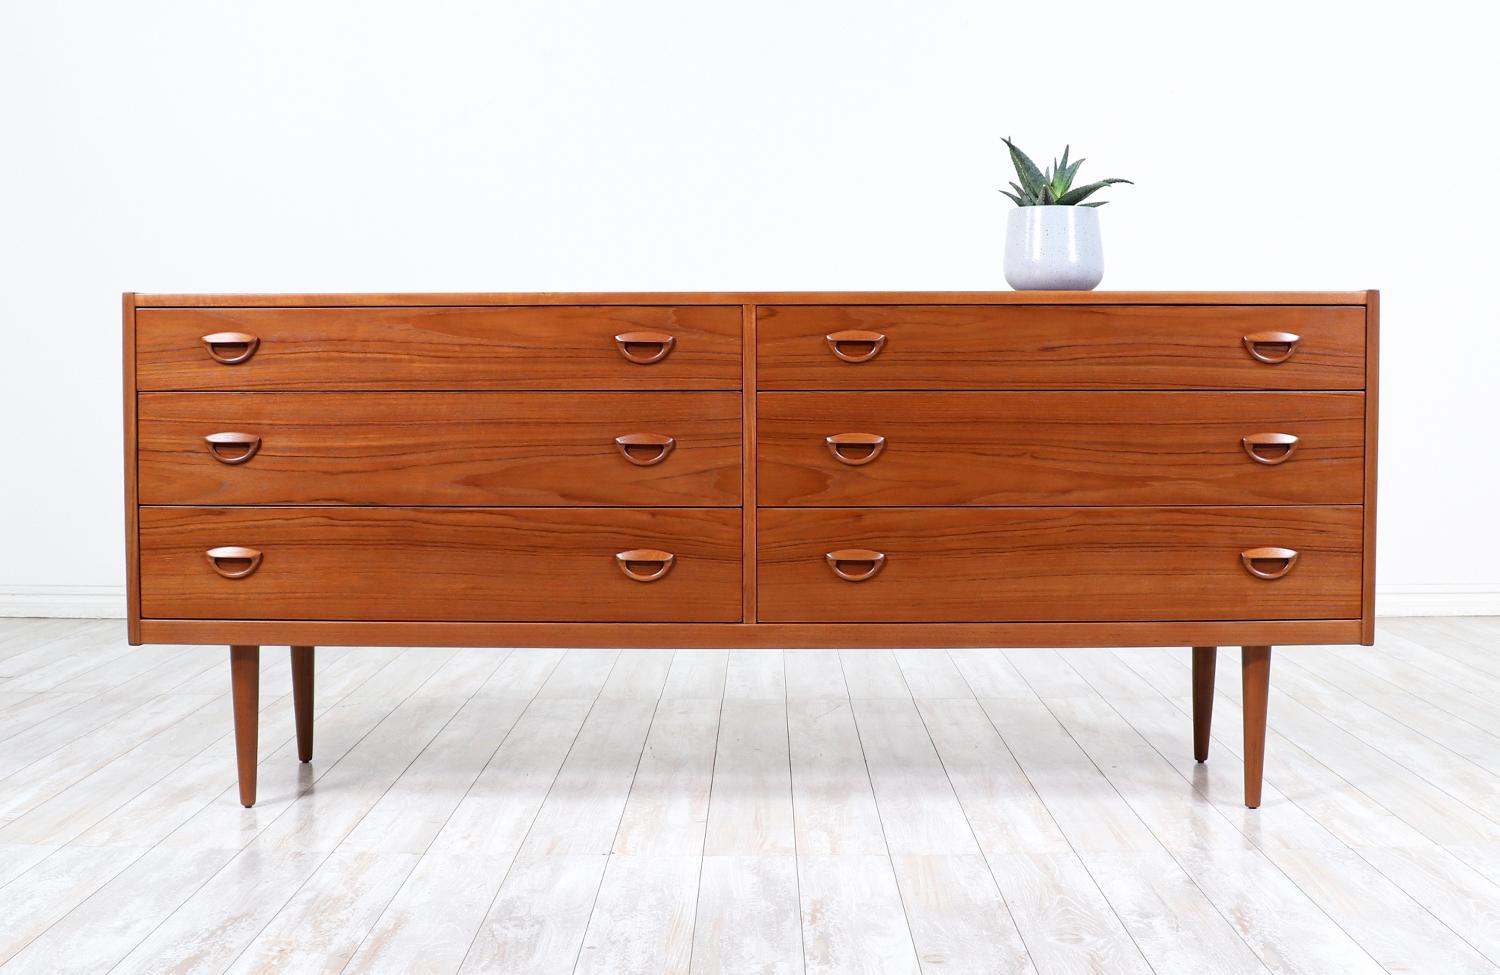 Elegant dresser designed by Kai Kristiansen for Fornem Møbelkunst in Denmark circa 1960’s. This practical dresser is beautifully crafted in teak wood featuring plentiful storage options with recessed carved pulls and six dovetailed drawers. The fine